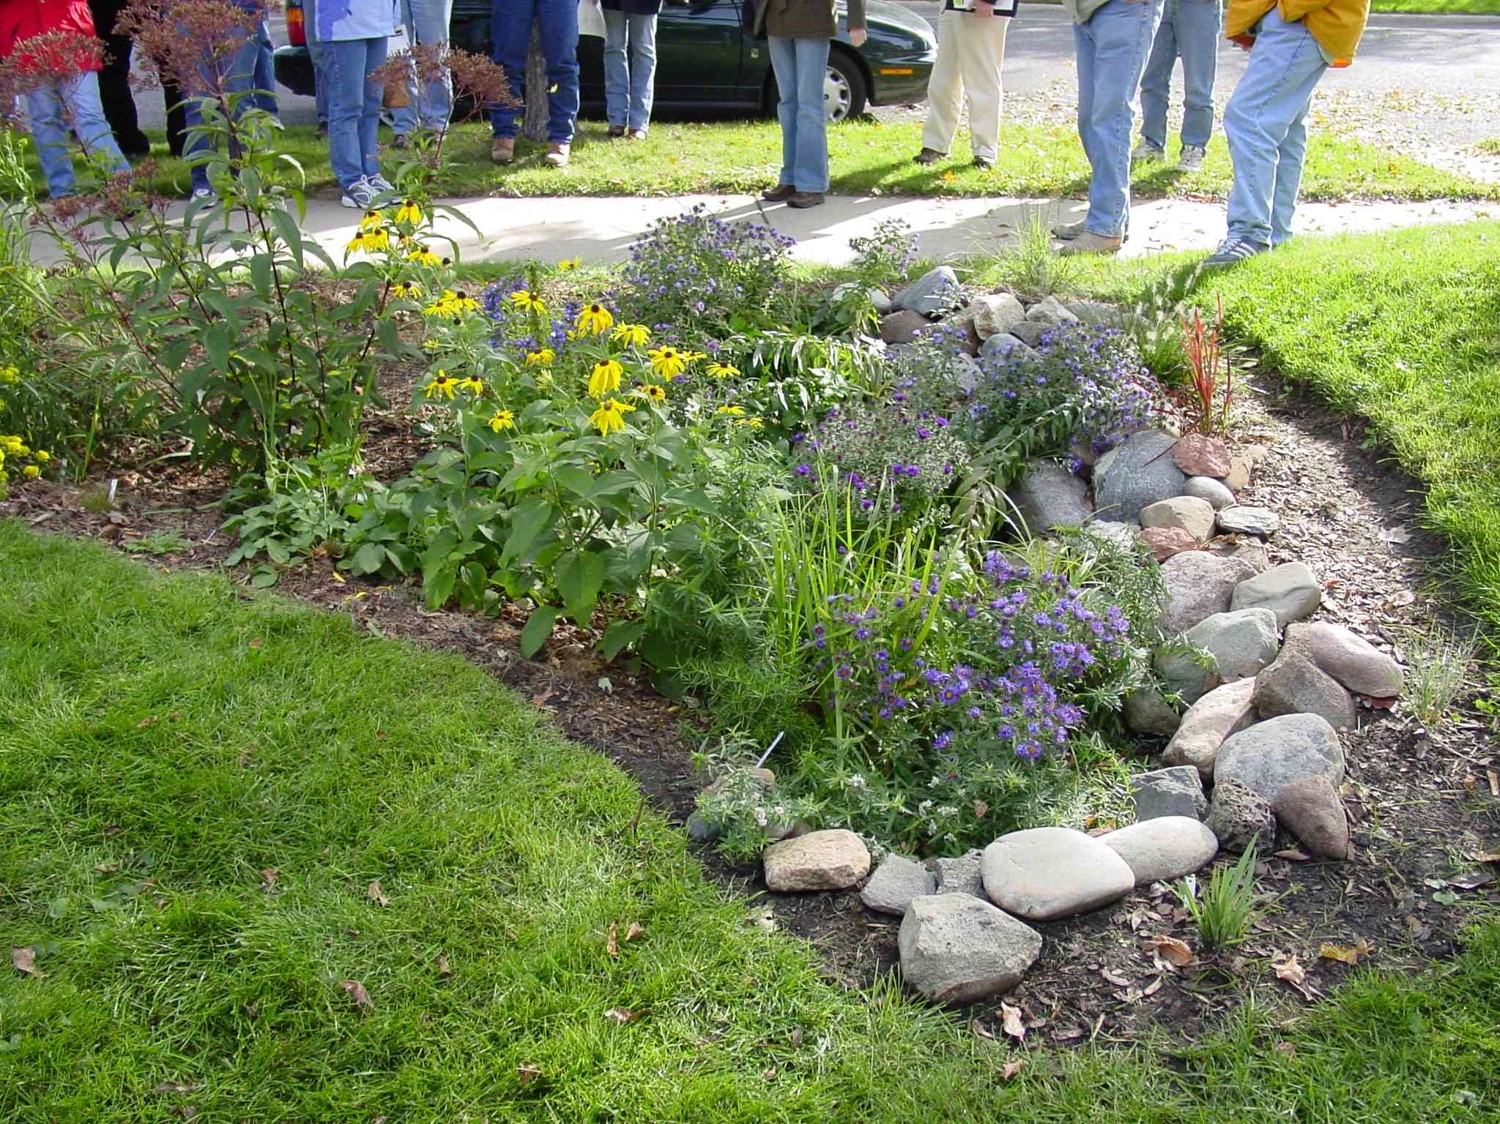 Rain Gardens Offer Option For Problem Areas Of Yard Gardening In